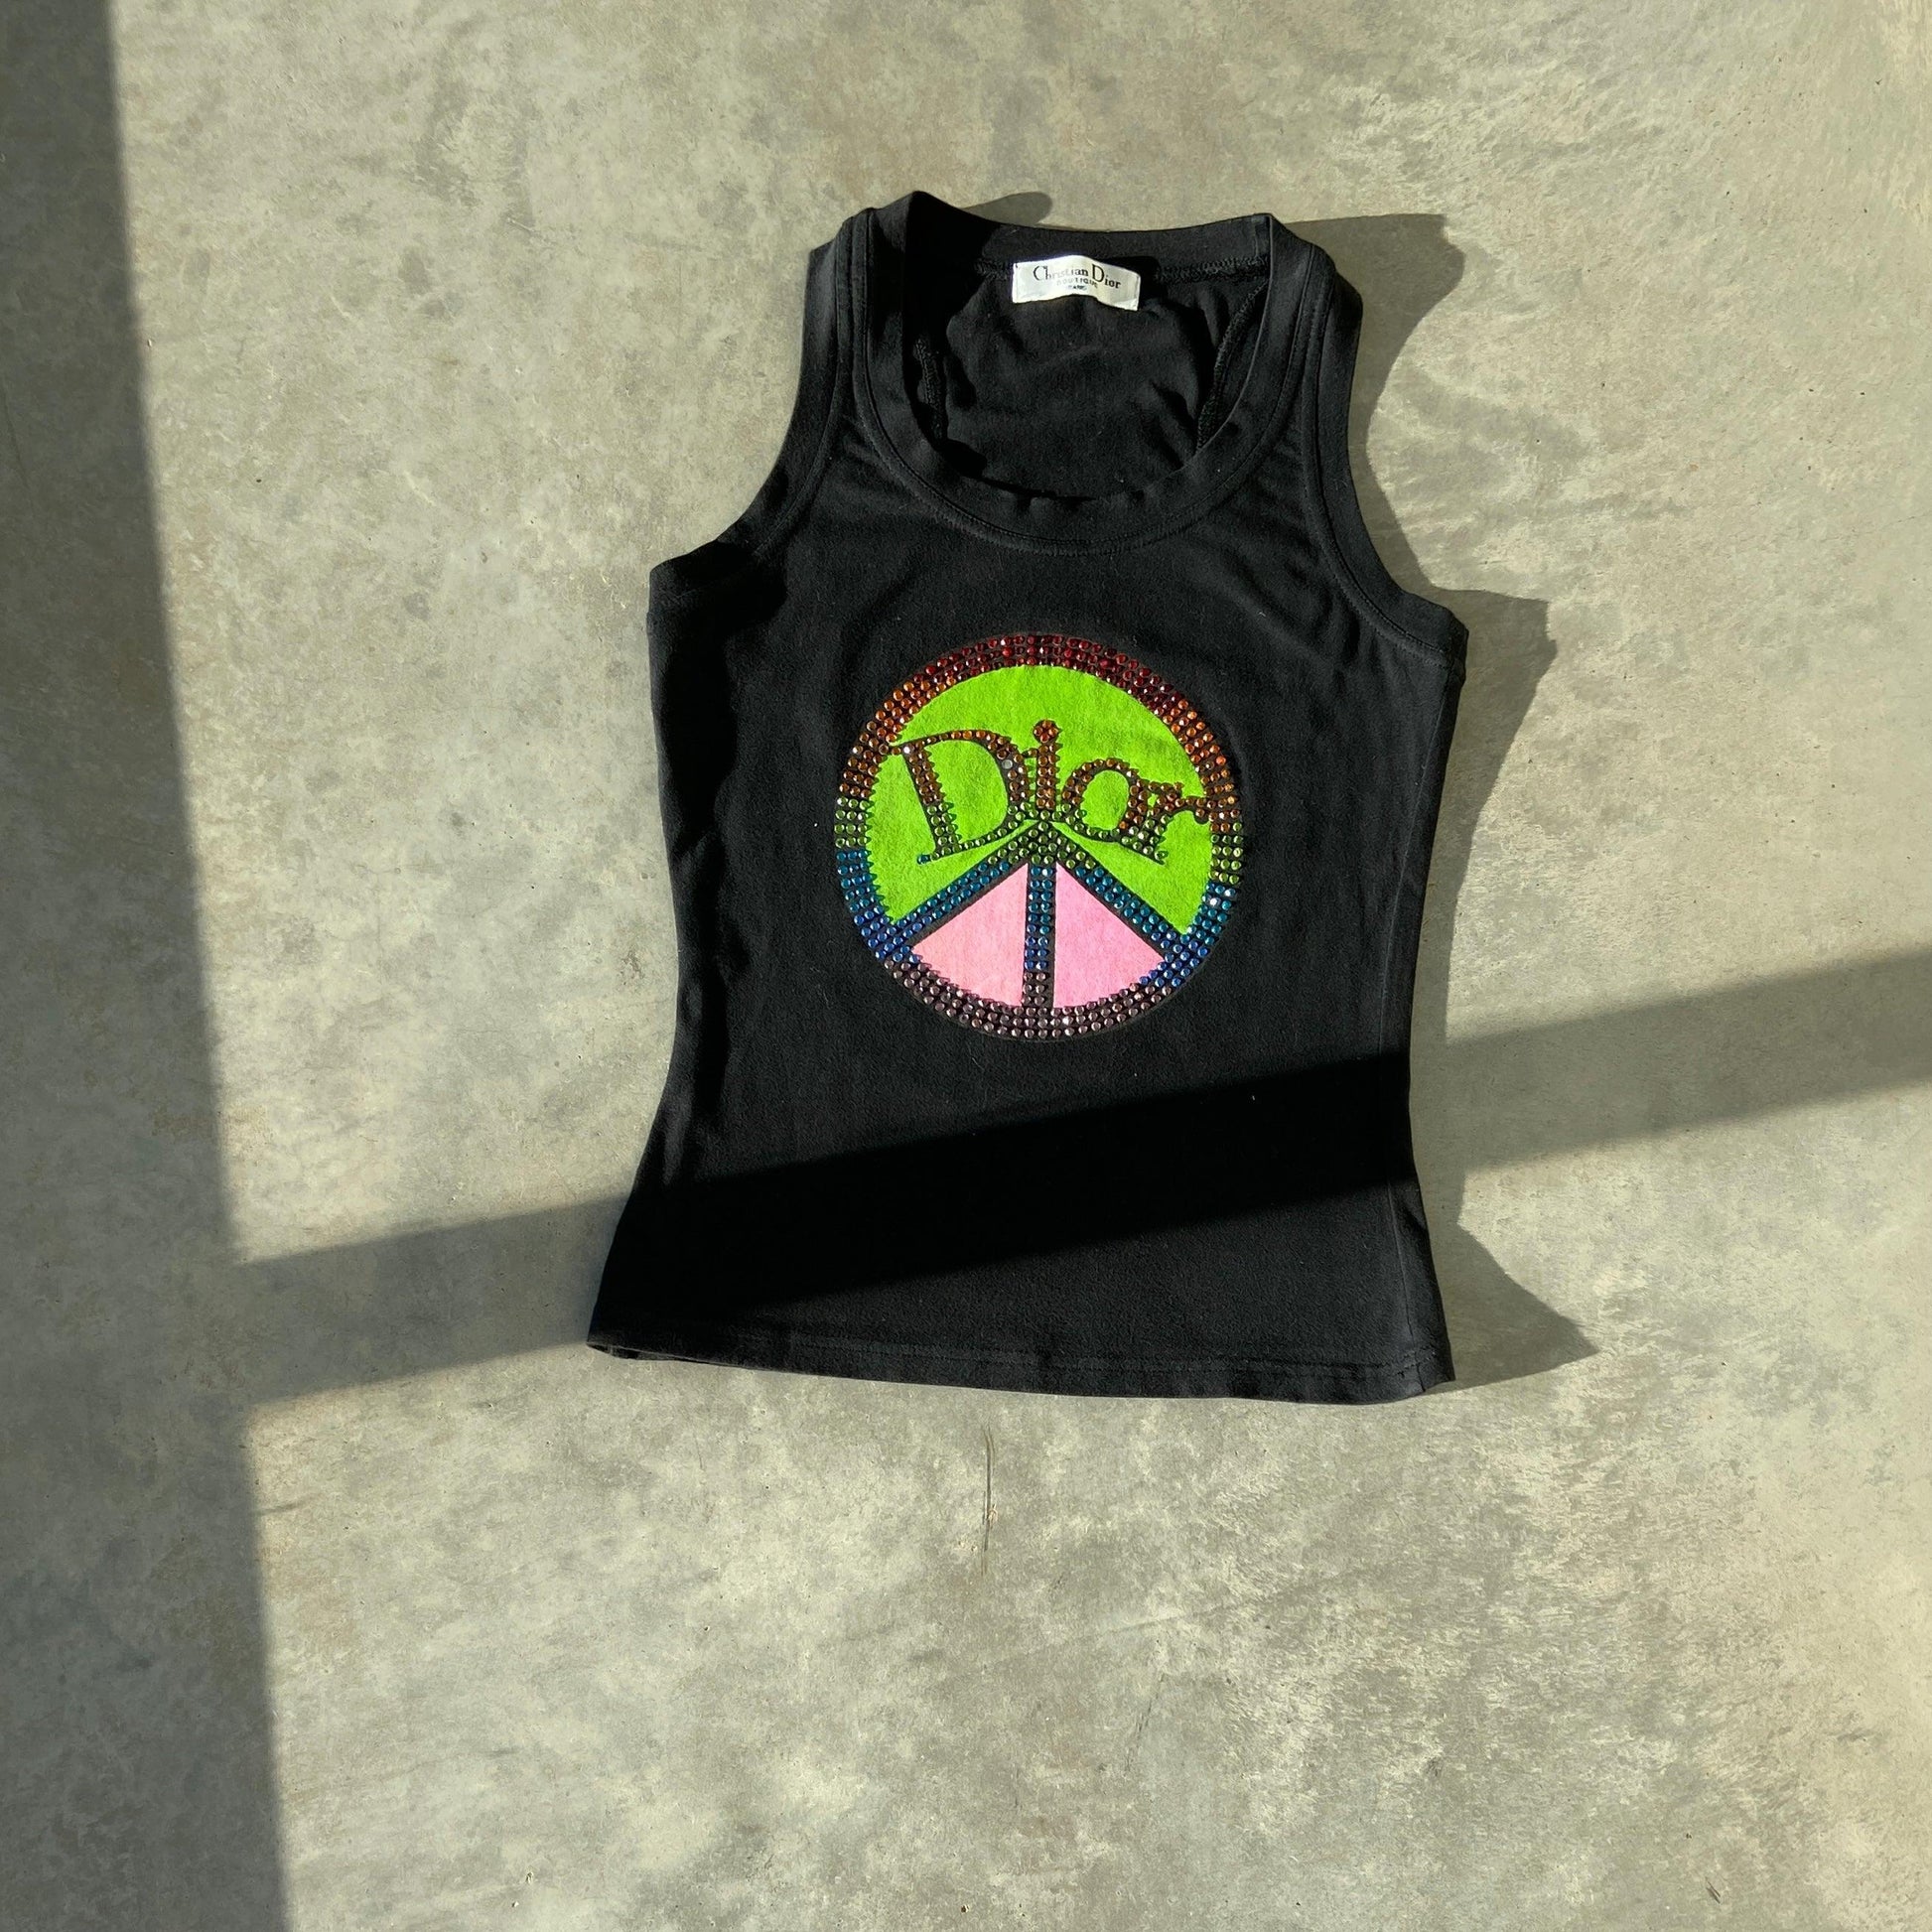 SS05 DIOR BY JOHN GALLIANO 'PEACE' TANK TOP - Known Source